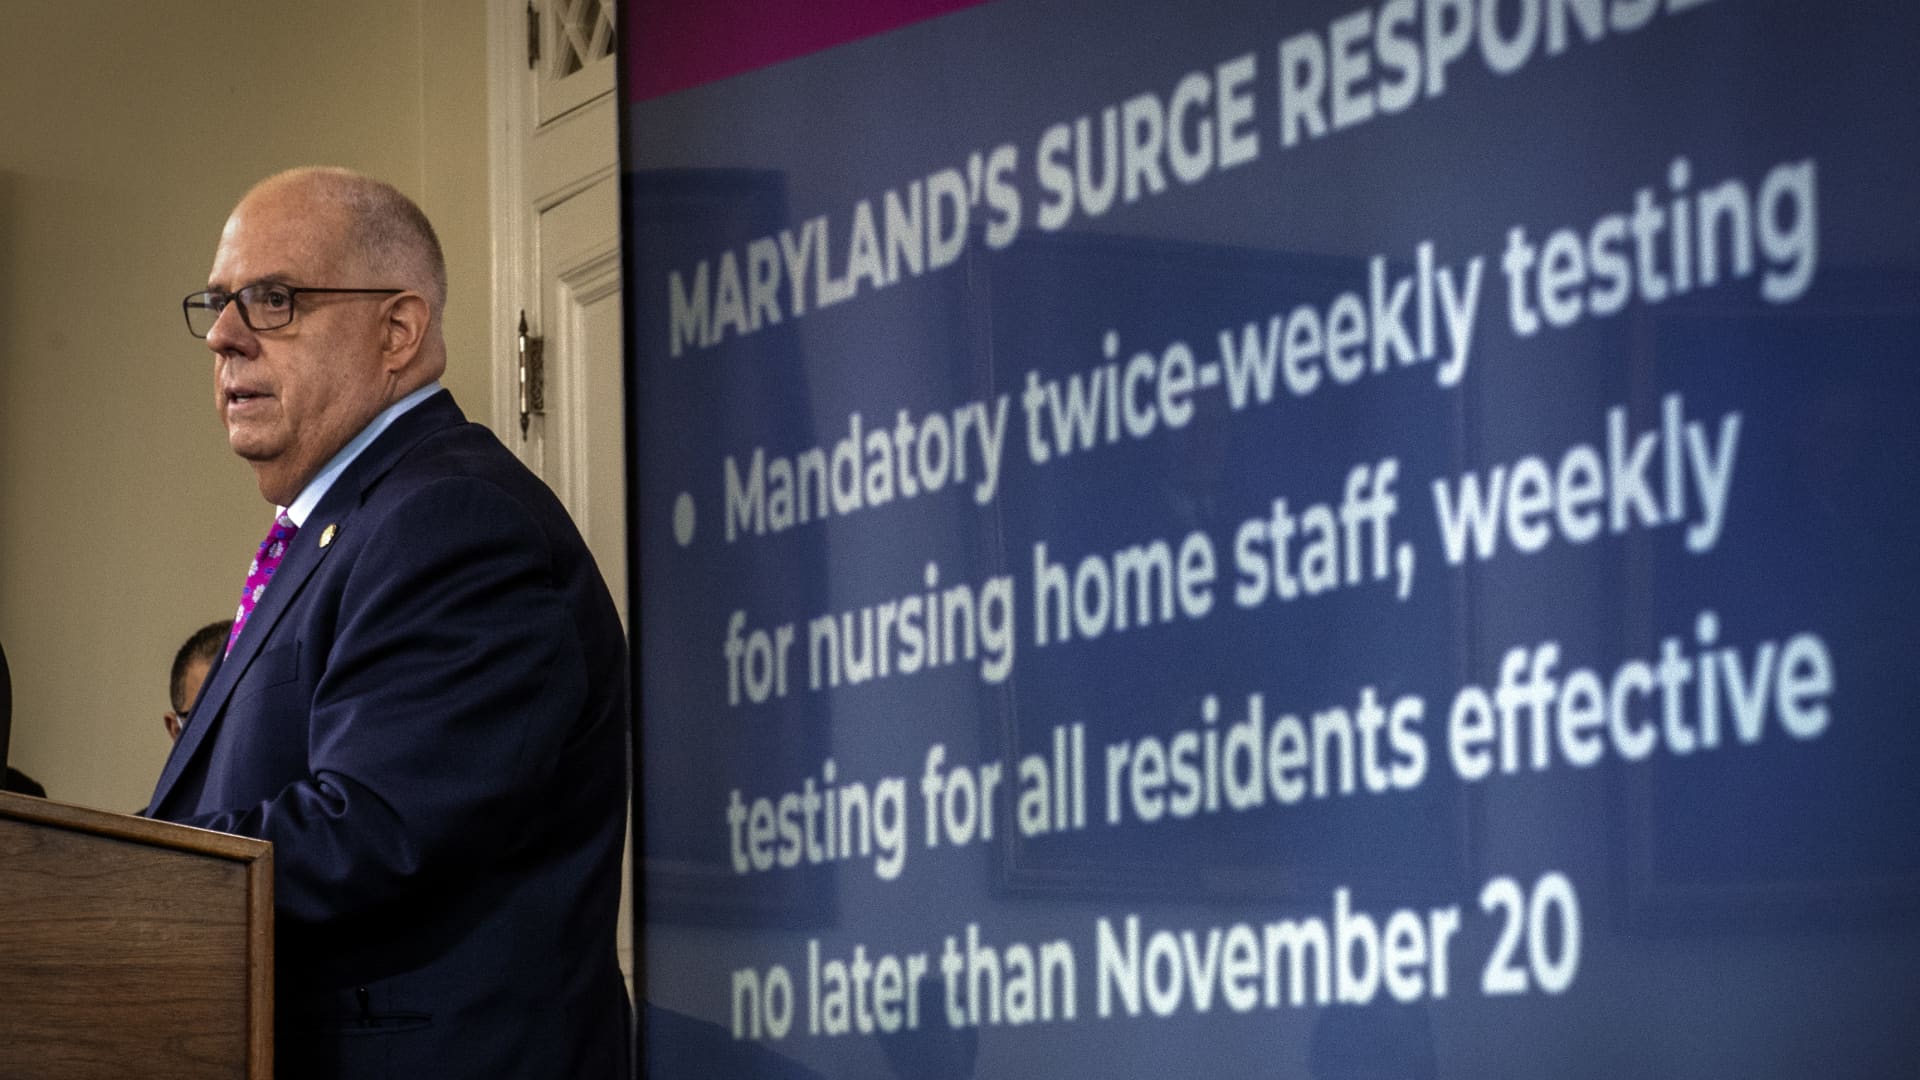 Maryland Governor Larry Hogan holds a press conference to address COVID-19 concerns in Annapolis, MD on November 17.